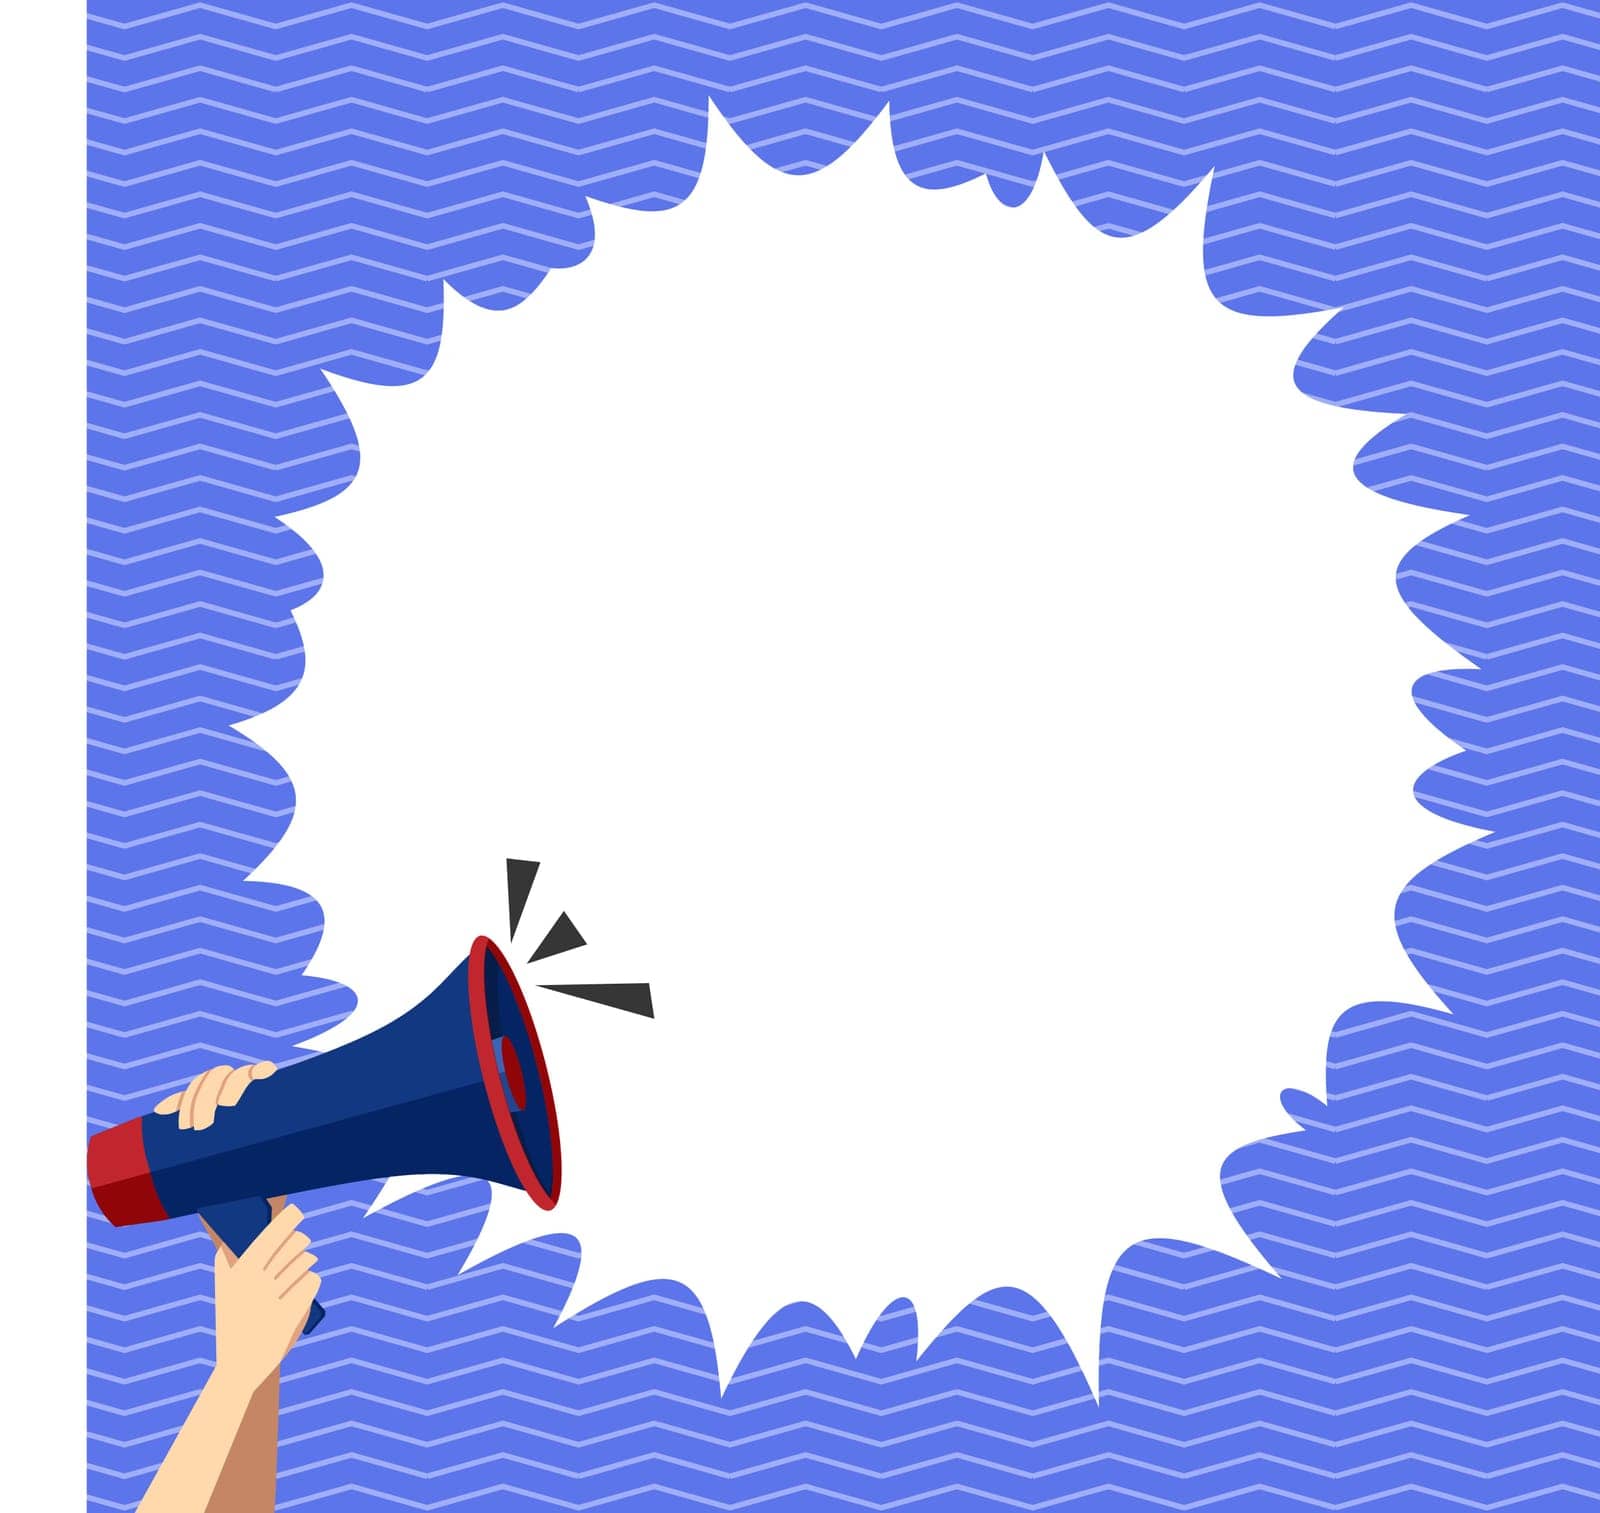 Hand Holding Megaphone Voice Device With Speech Balloon Presenting Fresh And Important News Messages. Bullhorn Drawing With Conversation Bubble Showing New Announcement. by nialowwa